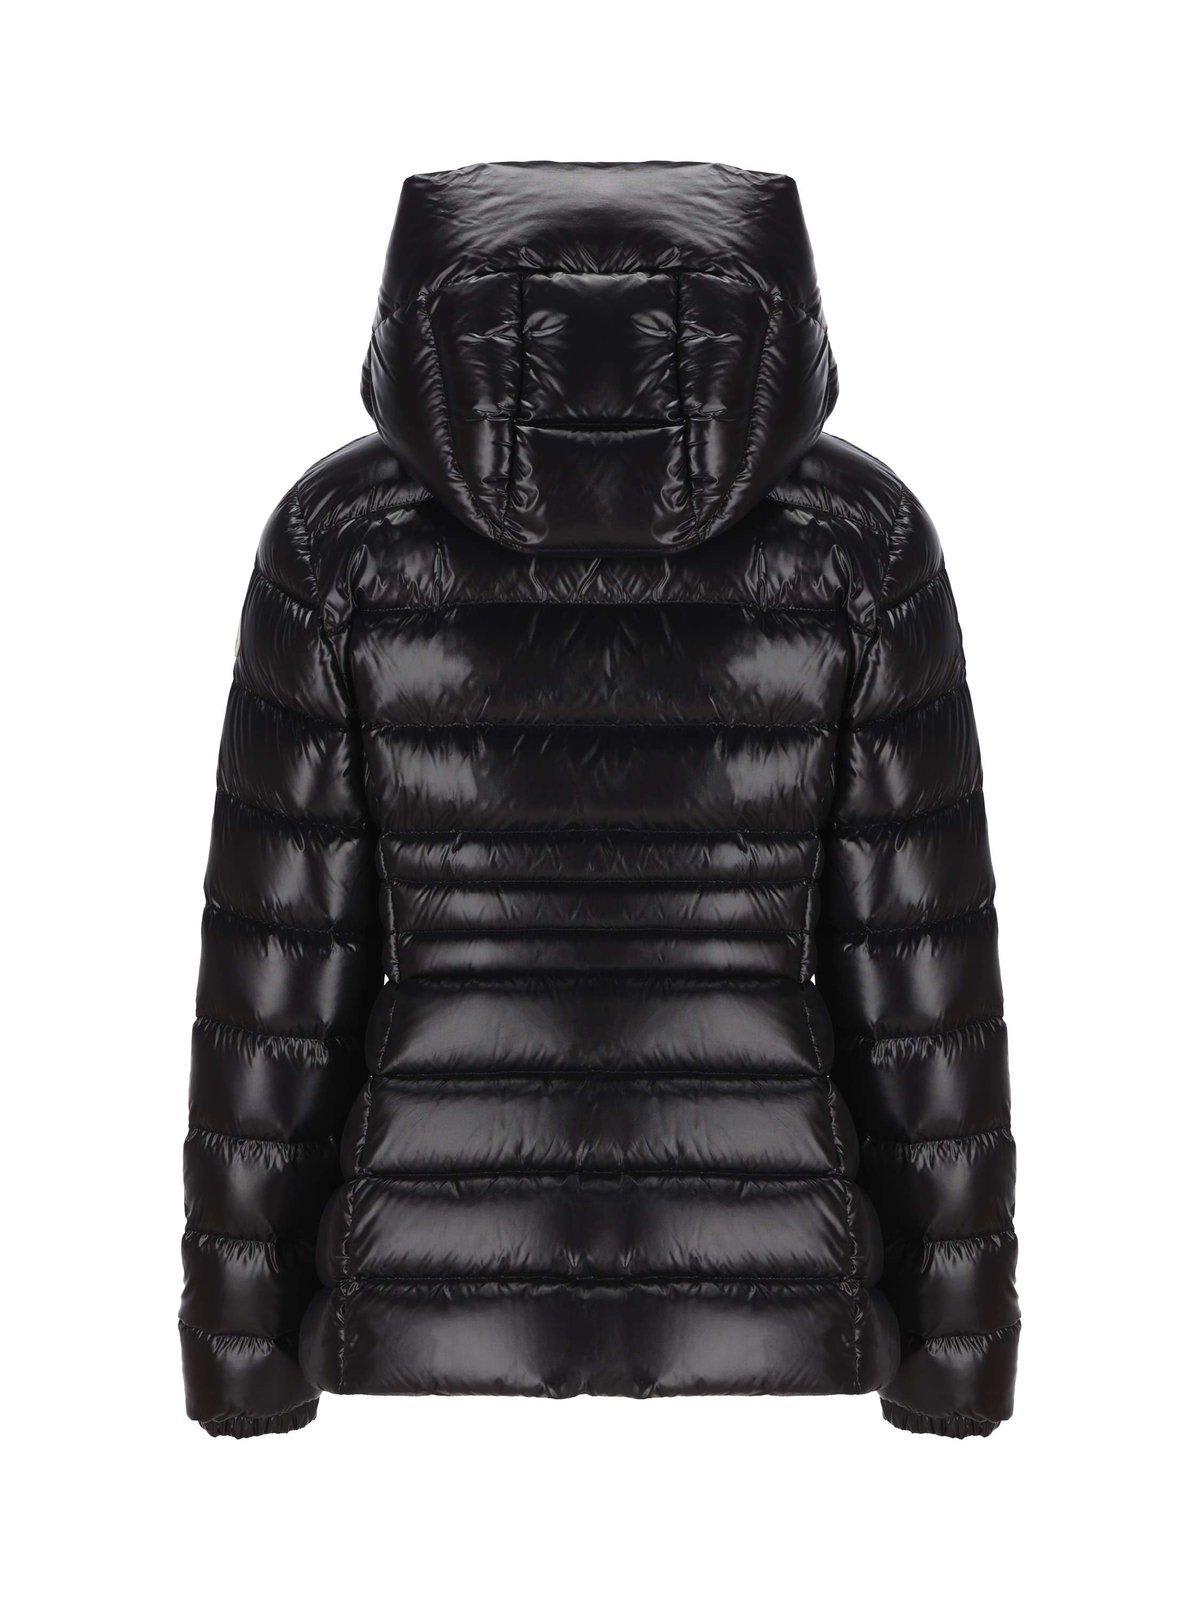 Moncler Logo Patch Zip-up Puffer Jacket in Black | Lyst